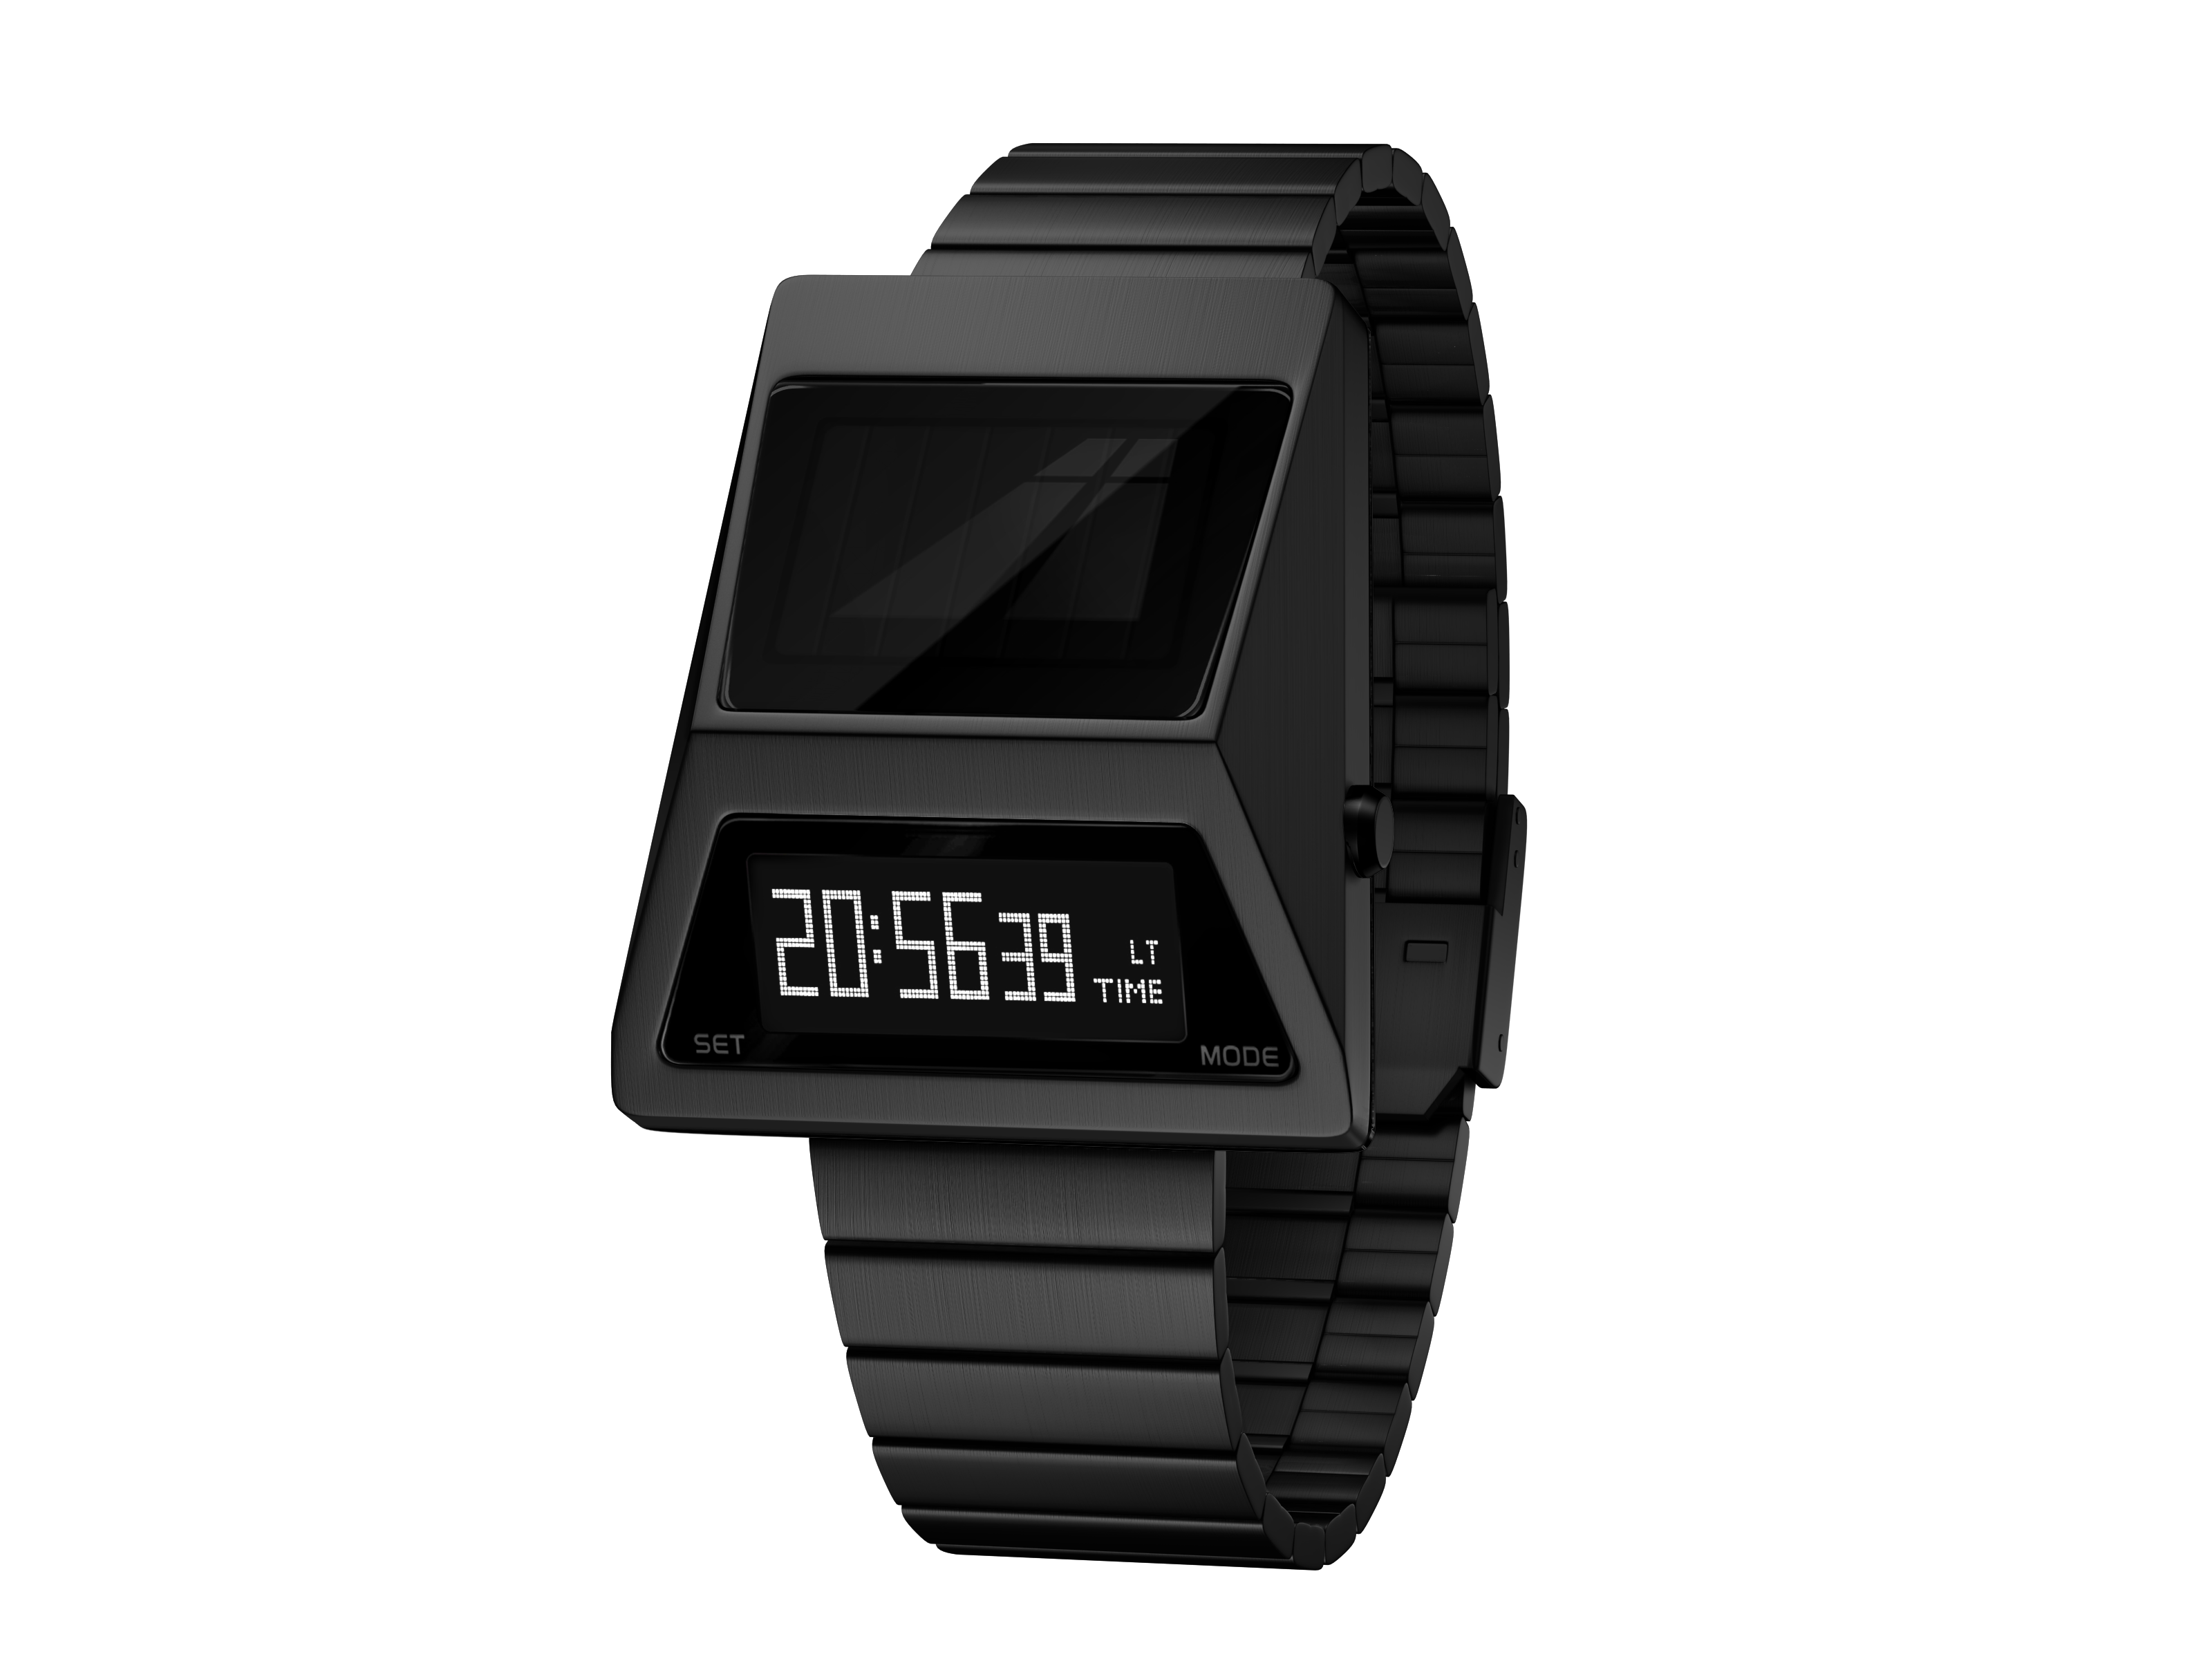 solar-powered-cyber-watches-s3000B-W-top view